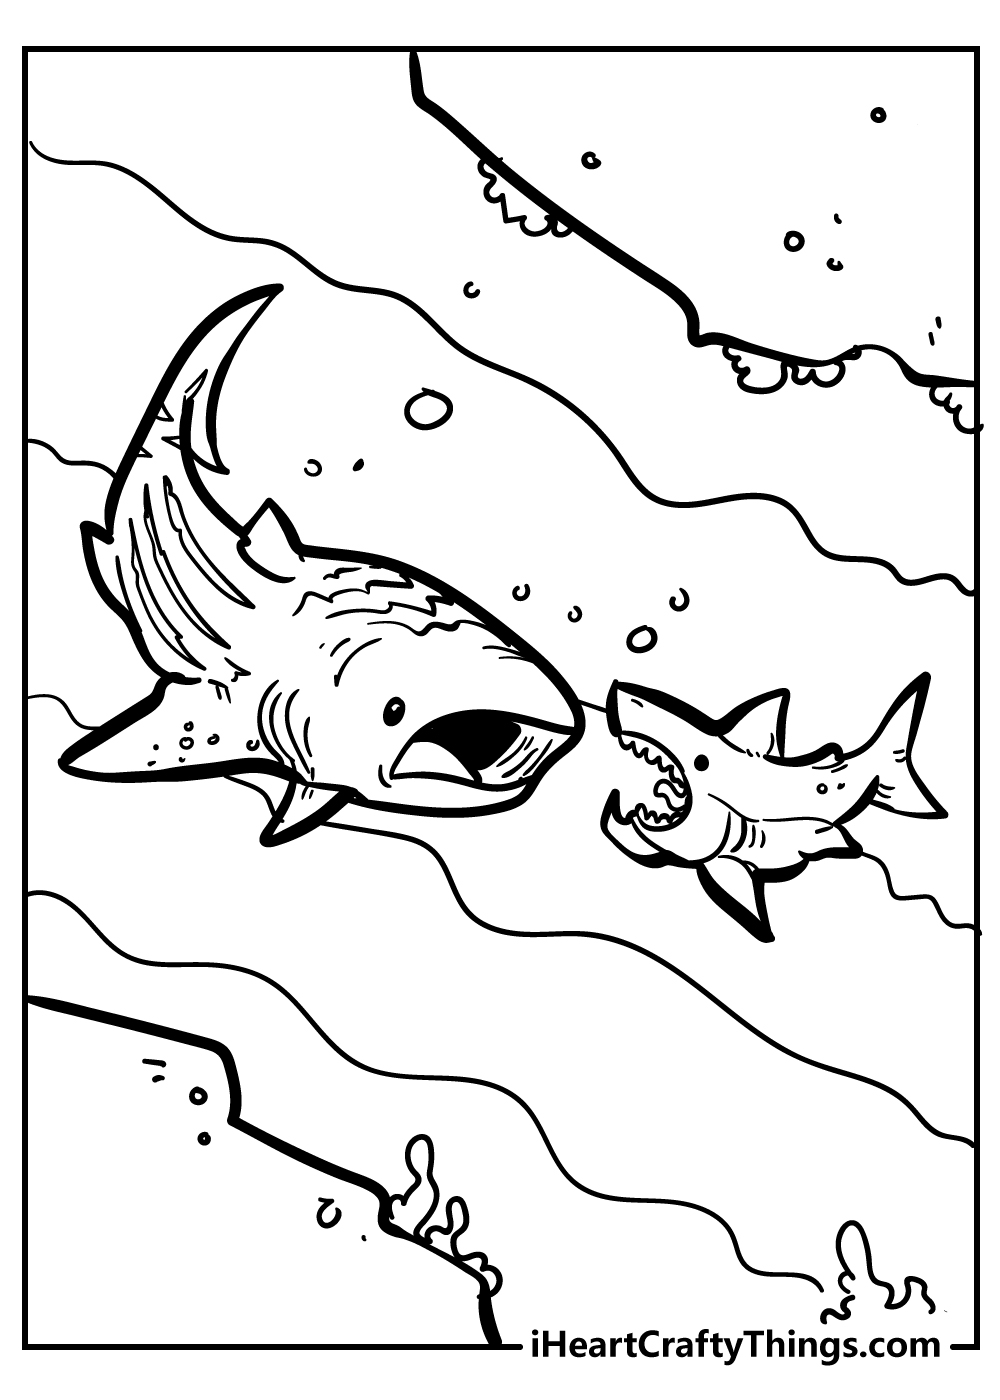 Shark coloring pages for preschoolers free printable